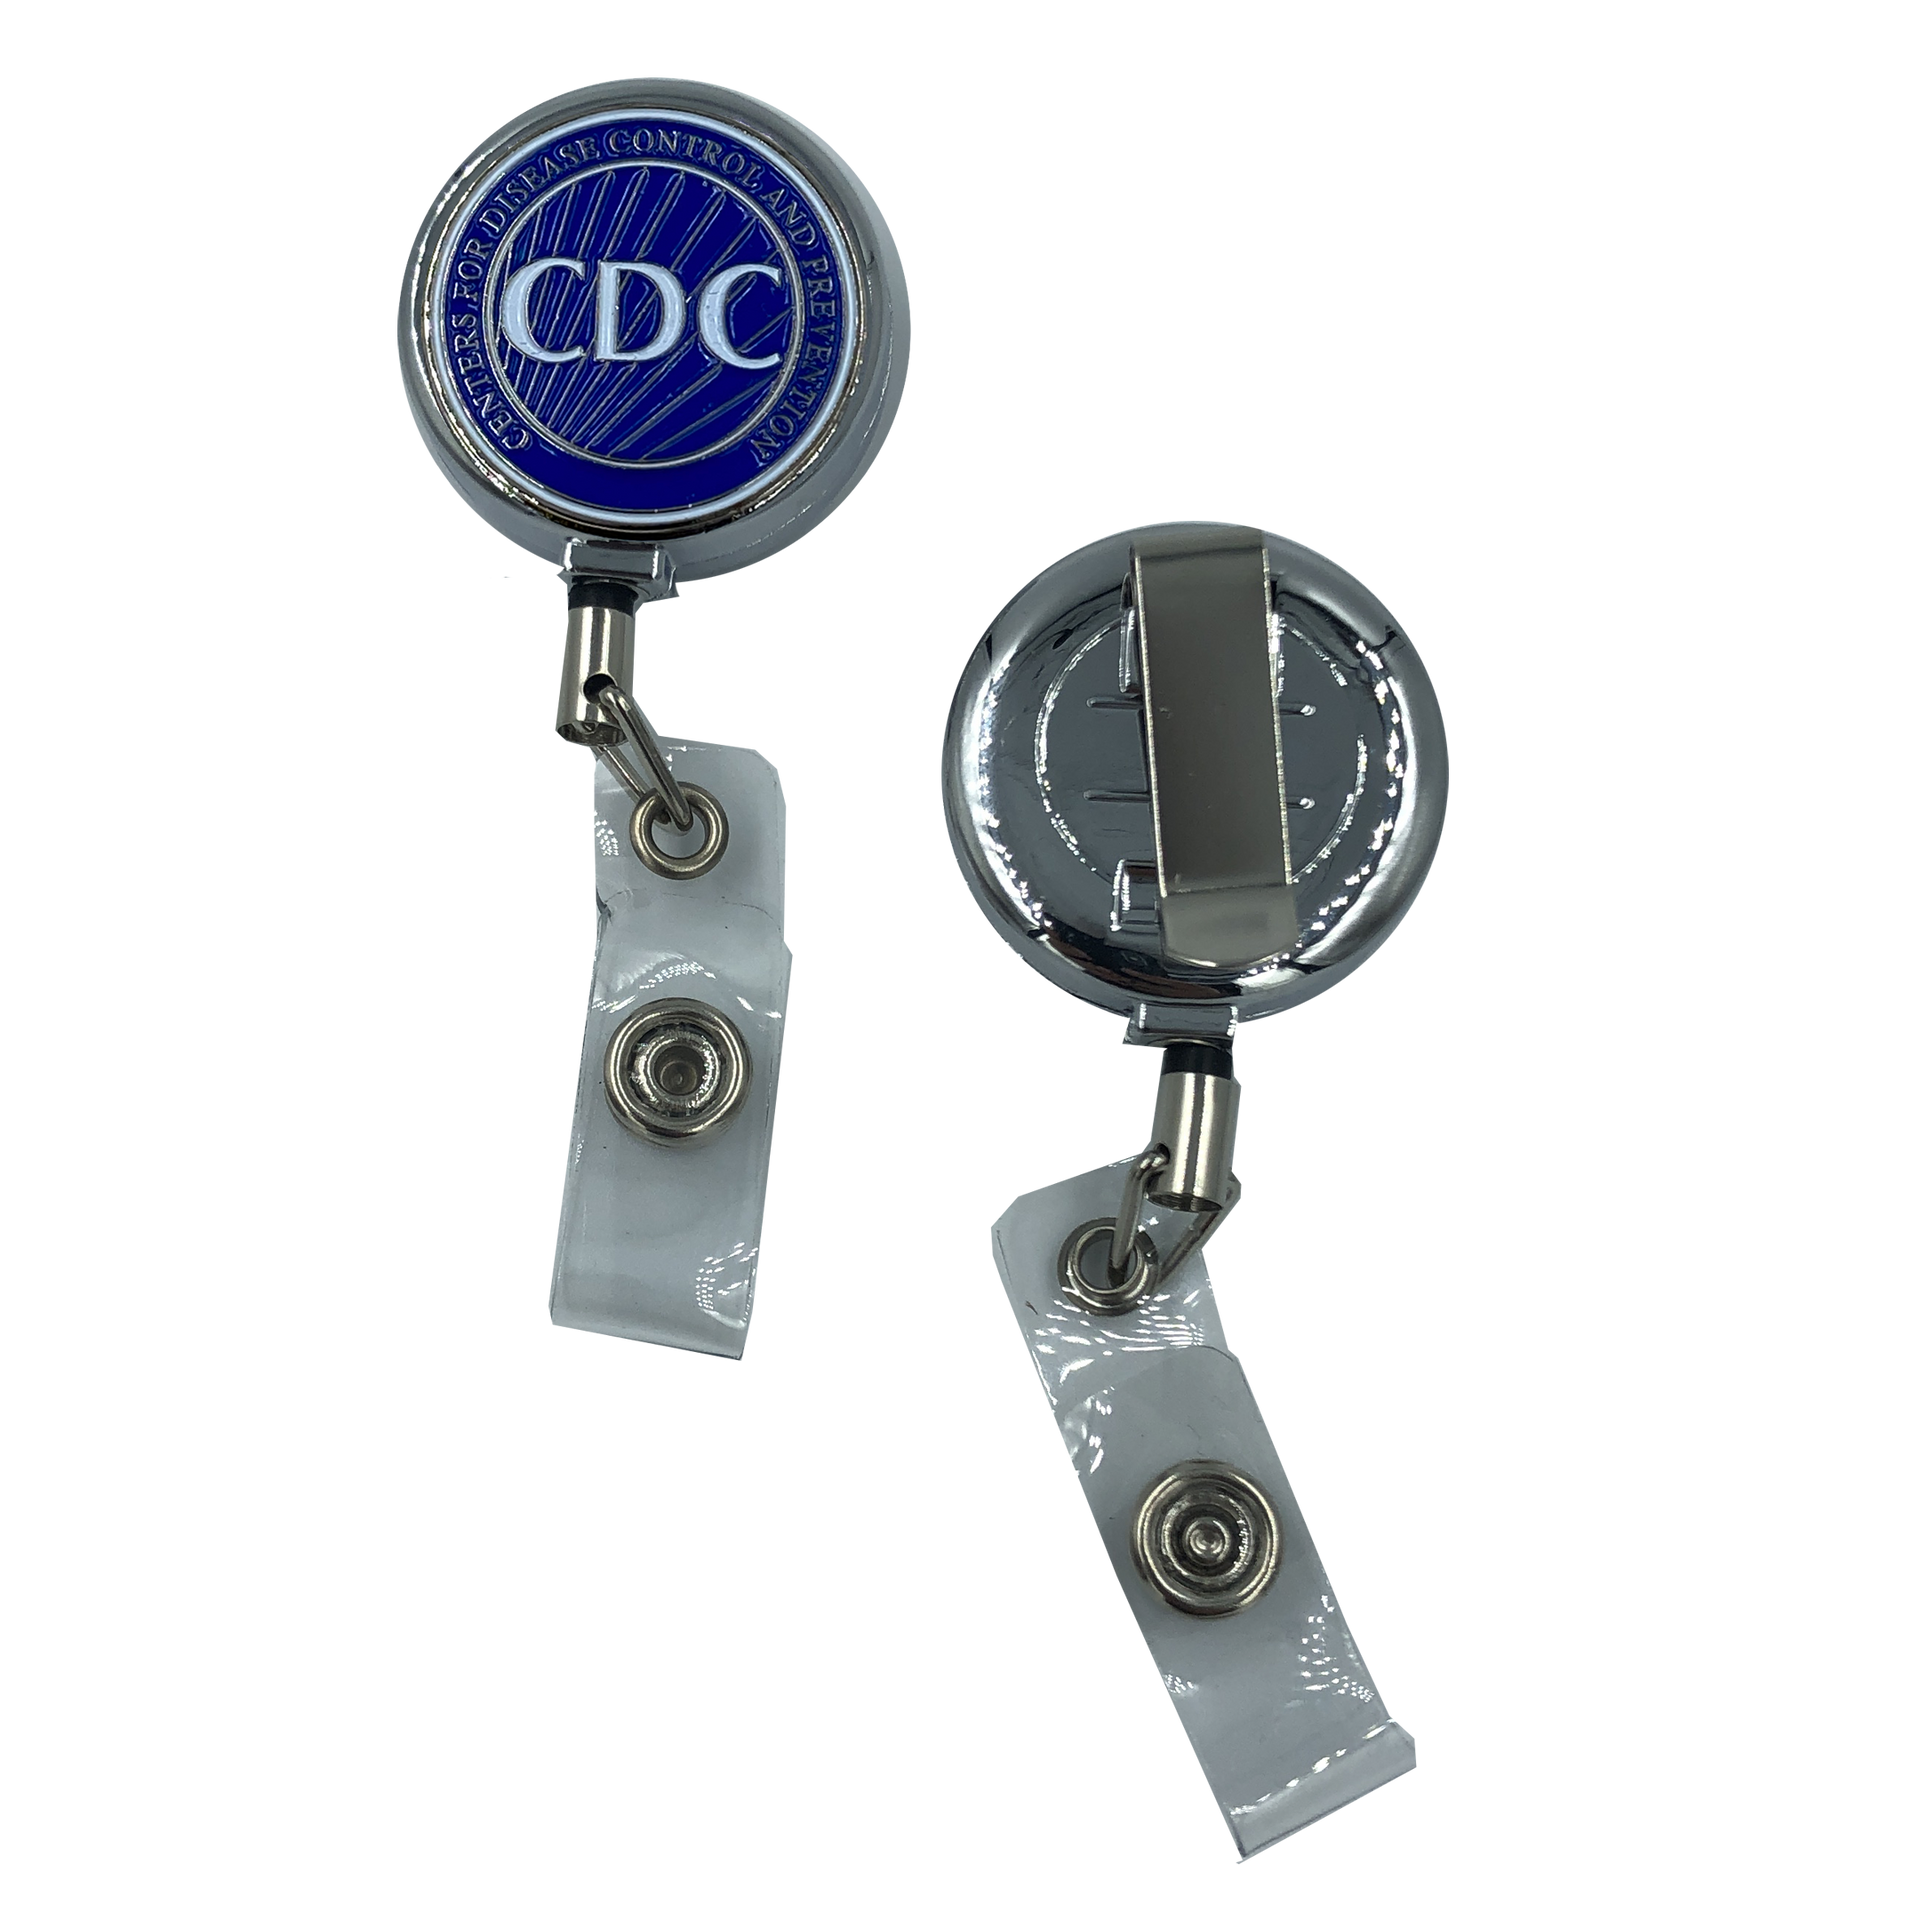 CL-008 CDC Metal ID Reel retractable ID Card Holder – America's